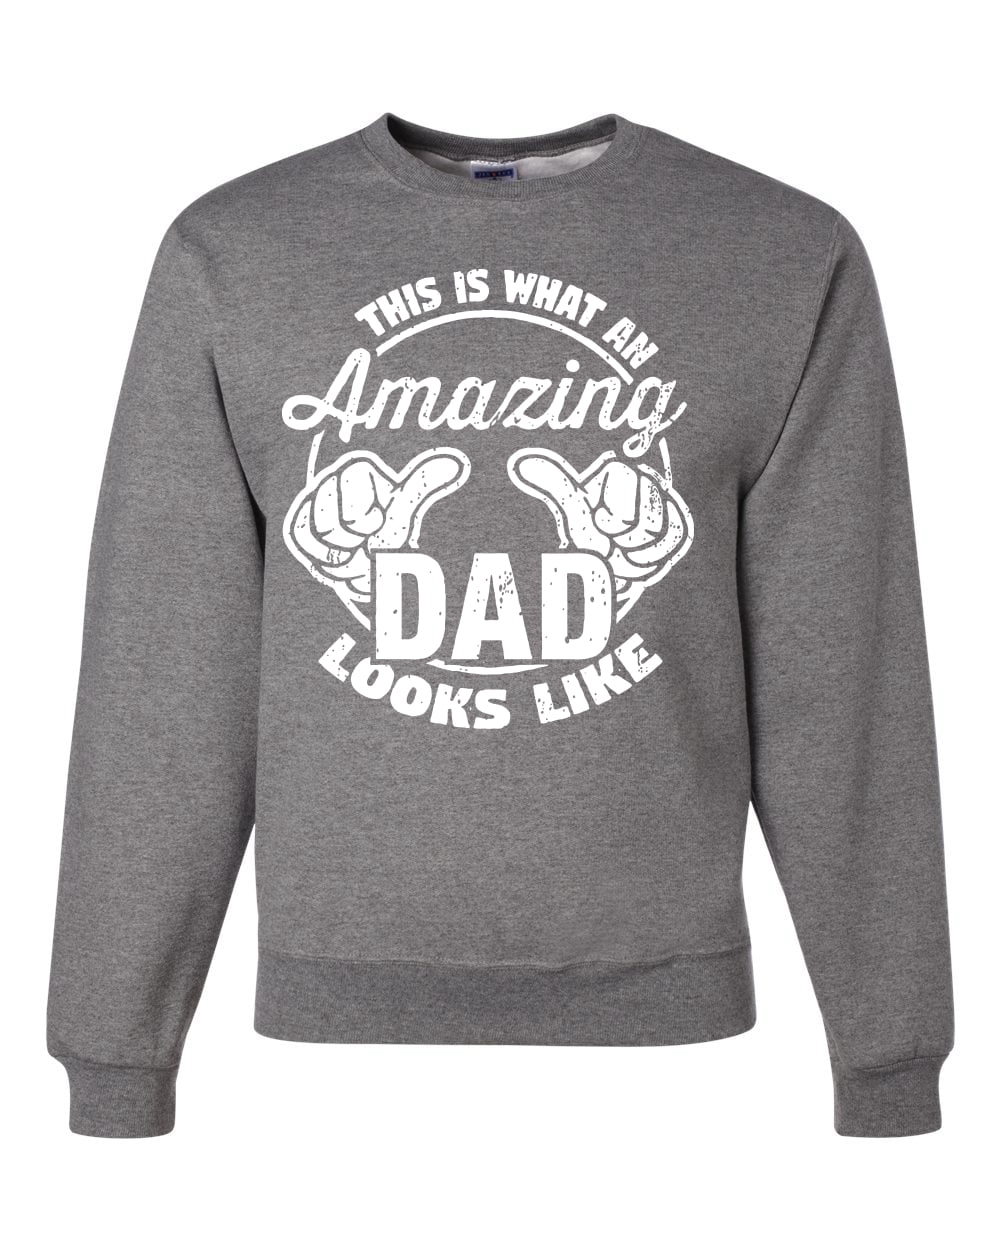 What A REALLY COOL GRANDPA Looks Like T-shirt Fathers Day Crew Neck Sweatshirt 